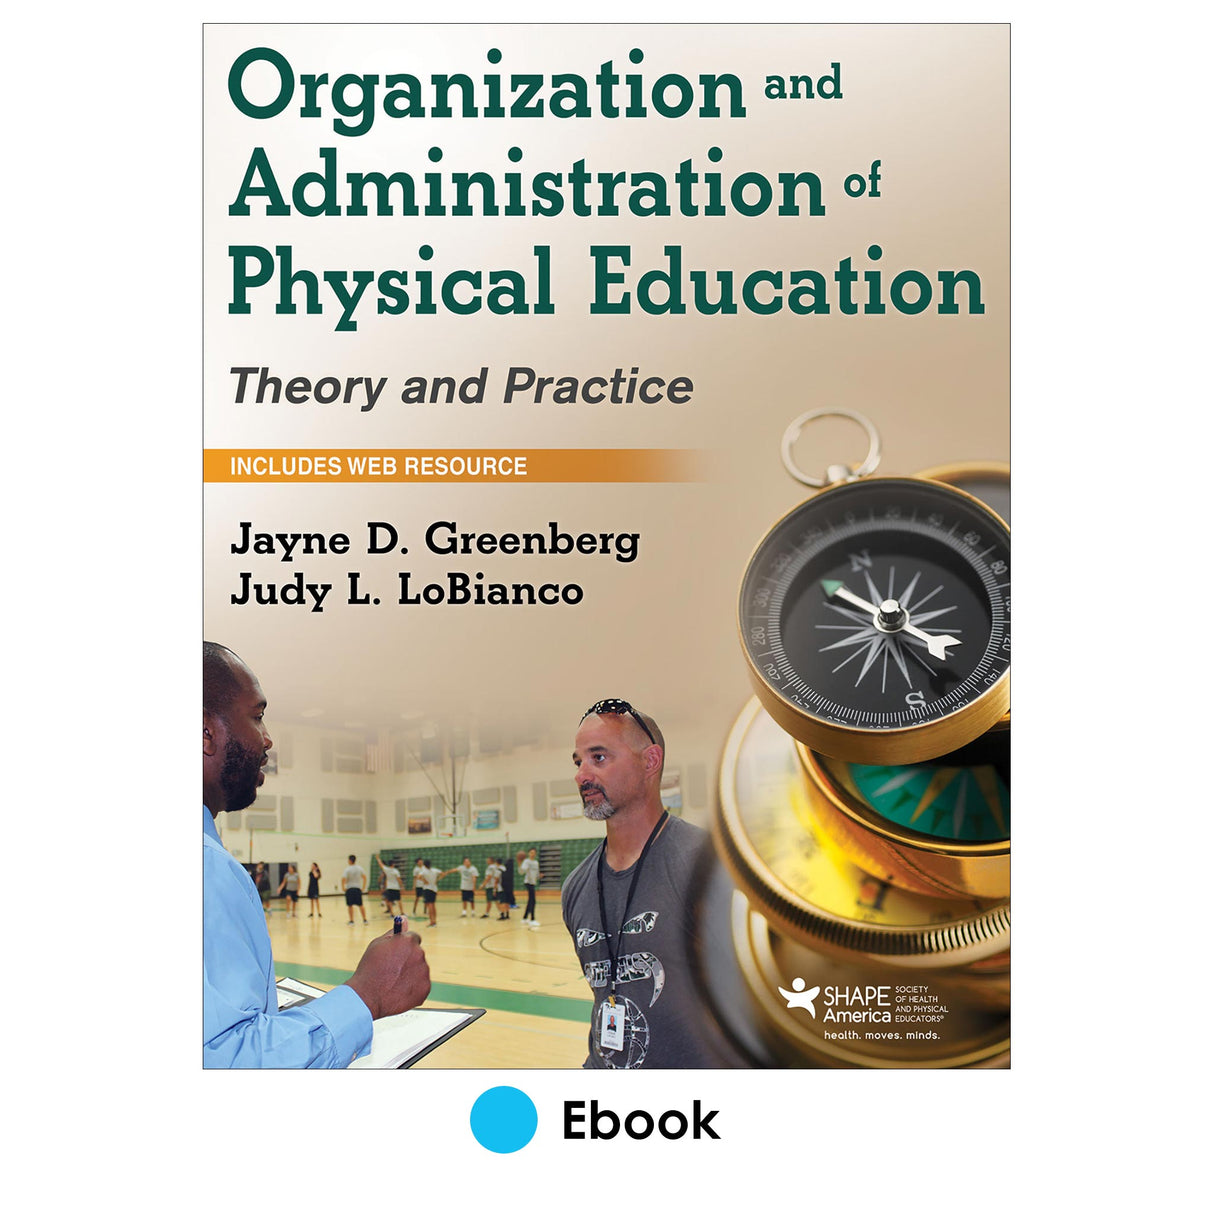 Organization and Administration of Physical Education Ebook With HKPropel Access